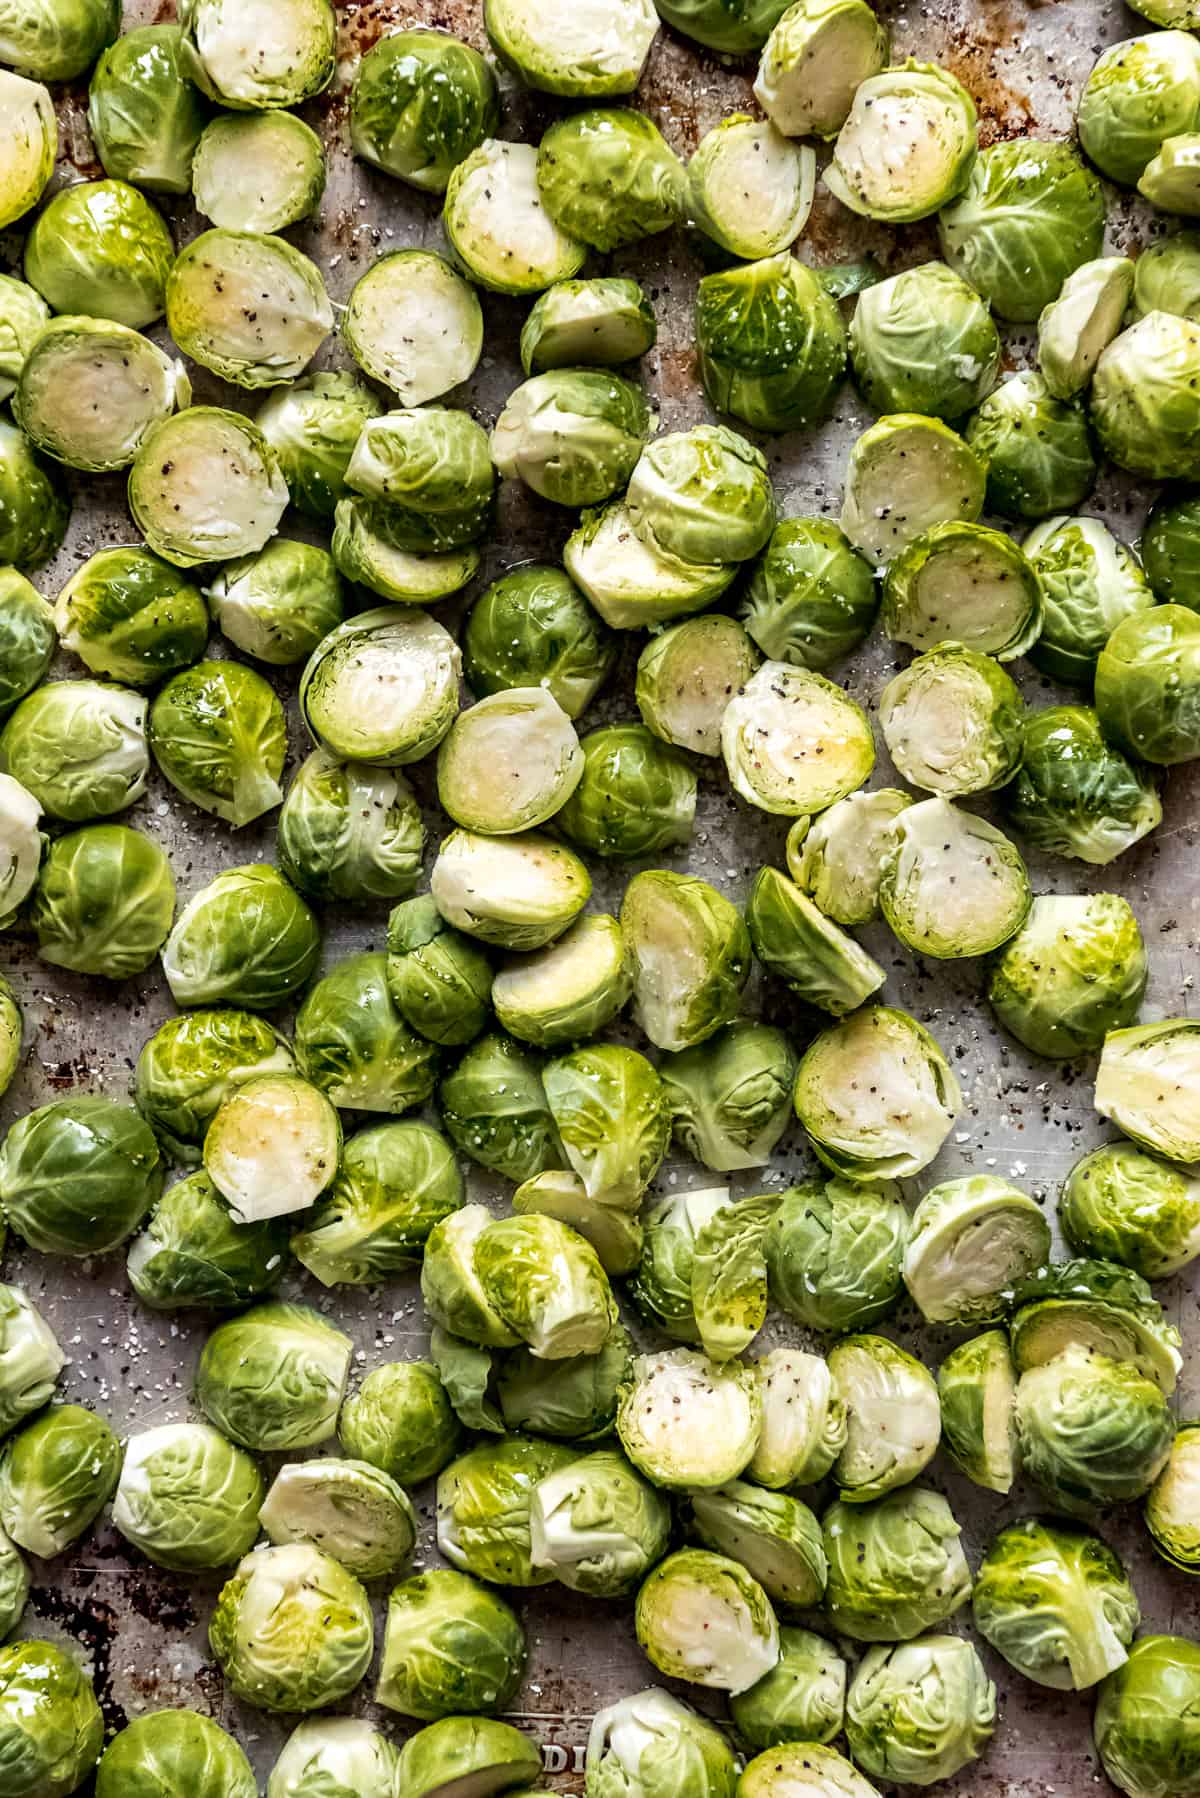 Brussels sprouts that have been sliced in half on a baking sheet lined with parchment paper.